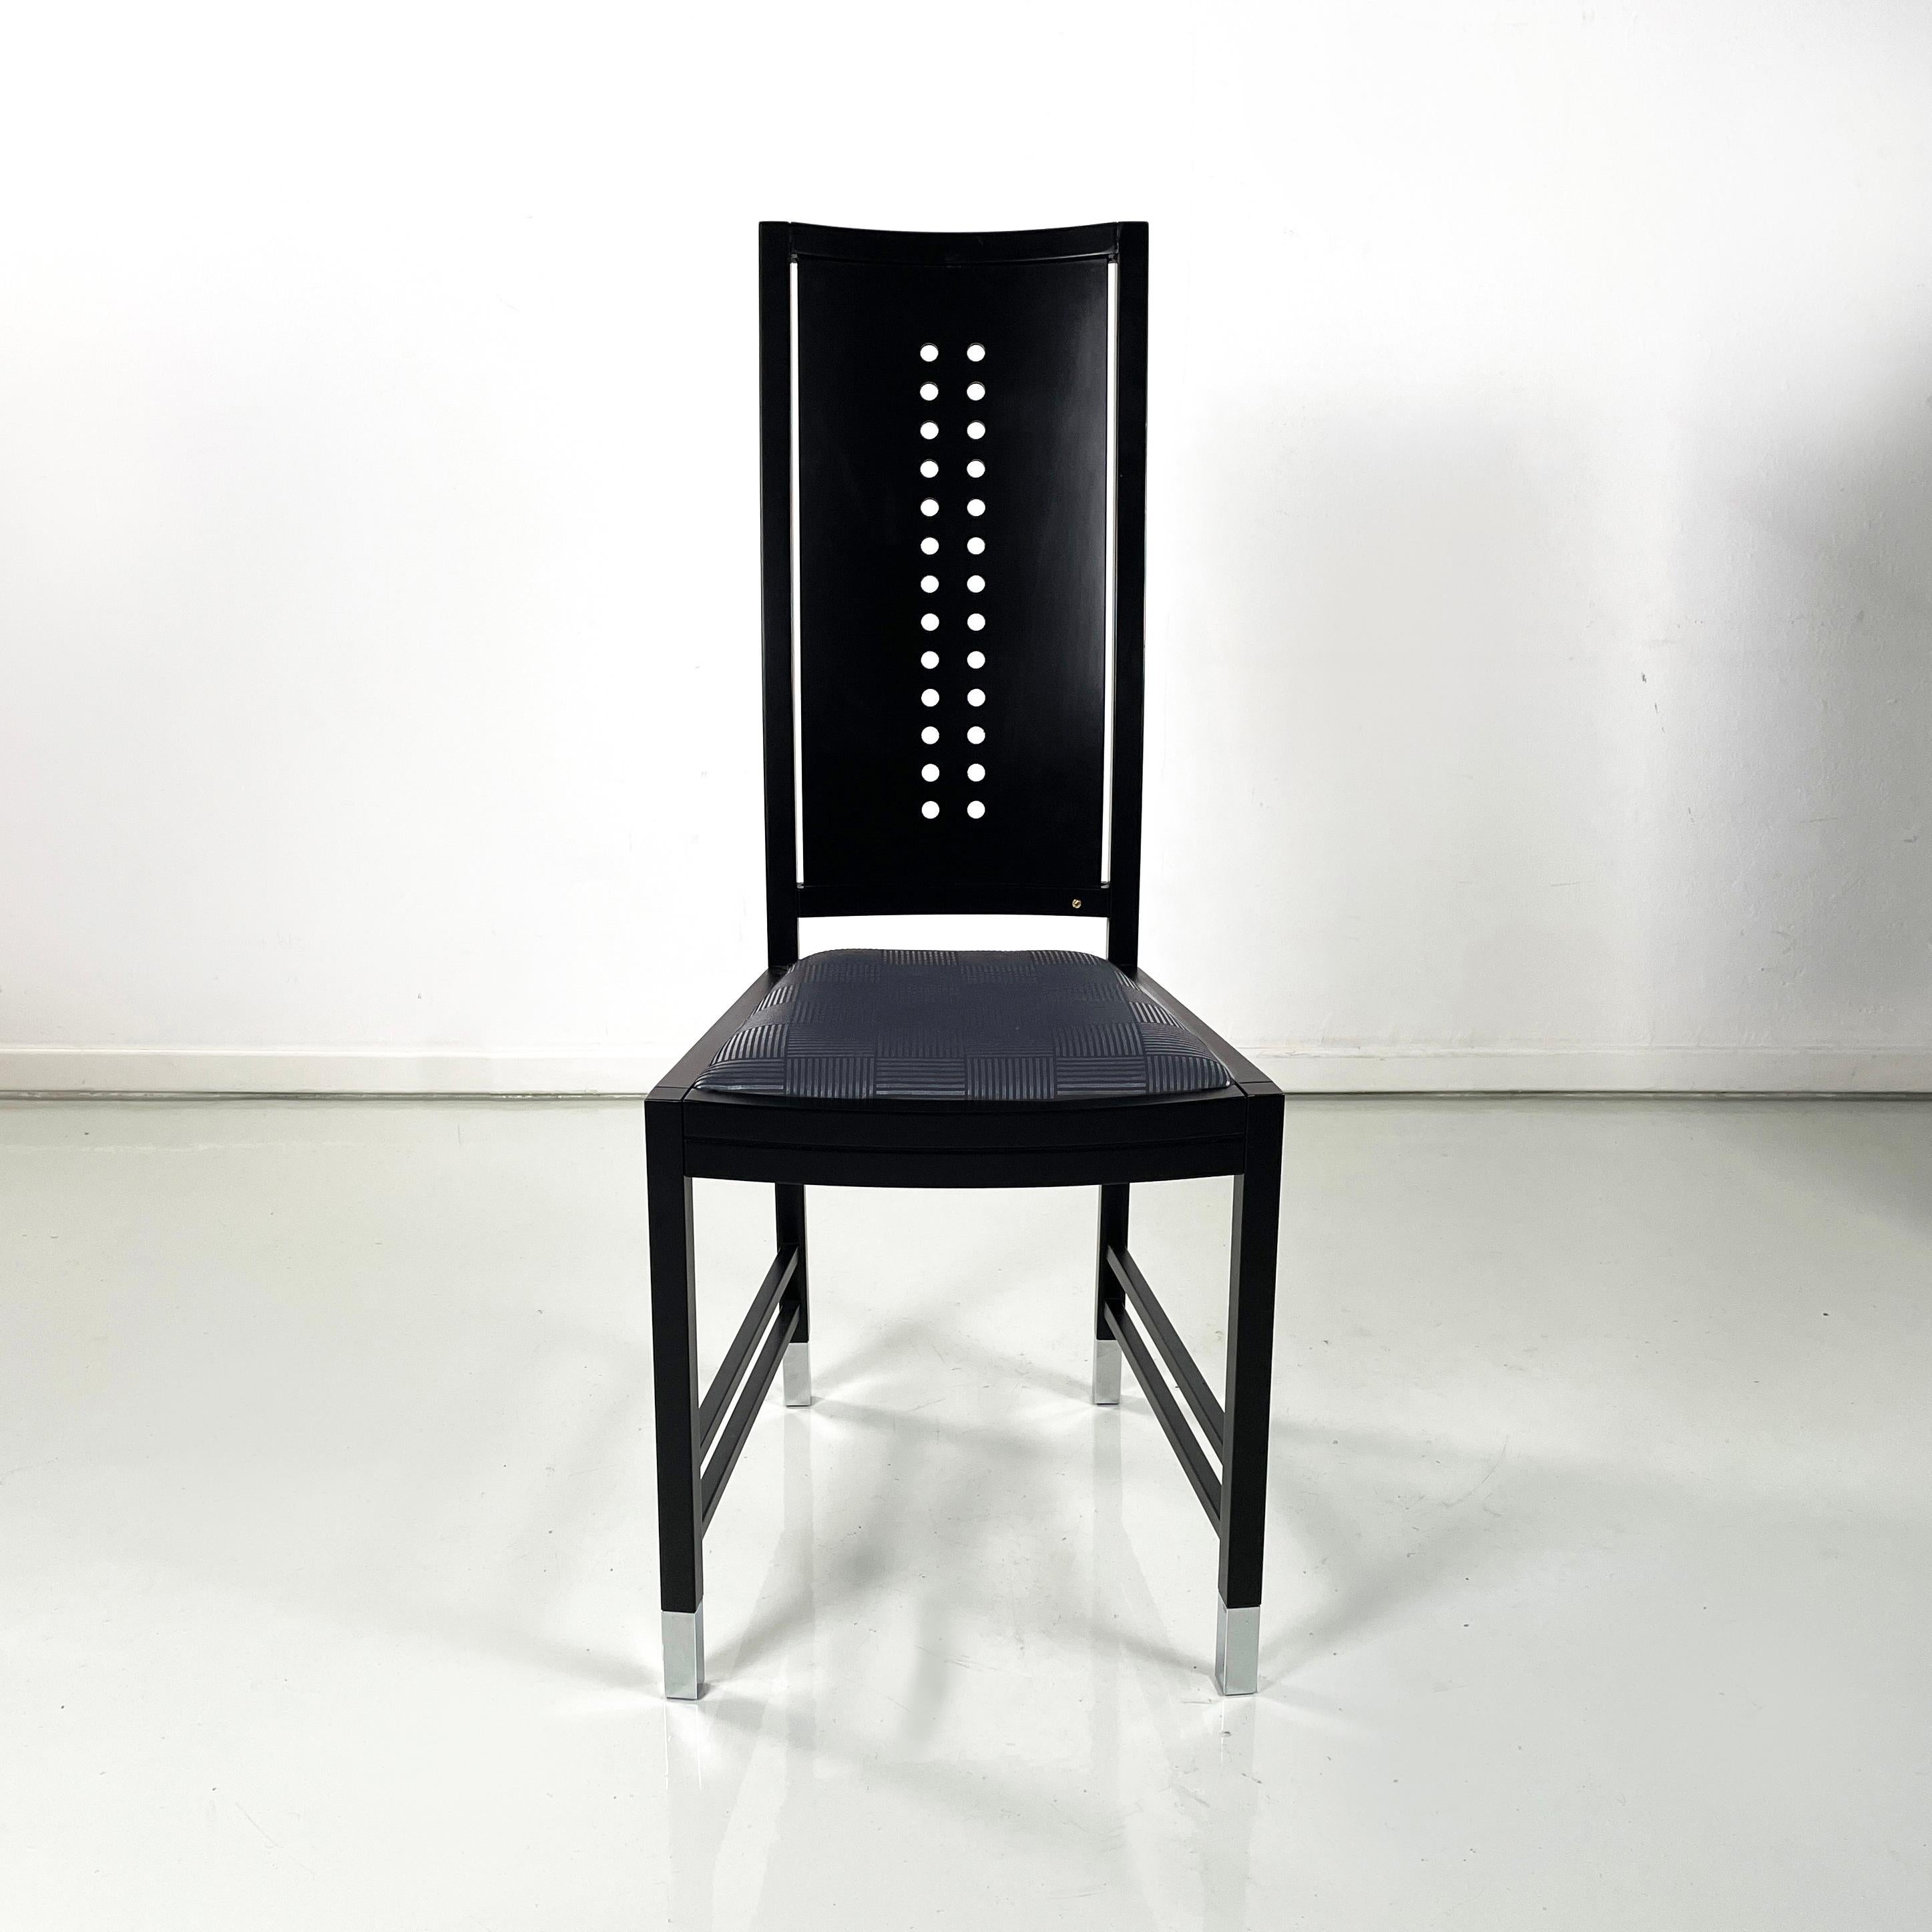 Austrian modern Chairs in black wood by Ernst W. Beranek for Thonet, 1990s
Set of three chairs with square seat, padded and covered in black fabric with silver geometric pattern. Structure in black lacquered wood with matt finish. The backrest is